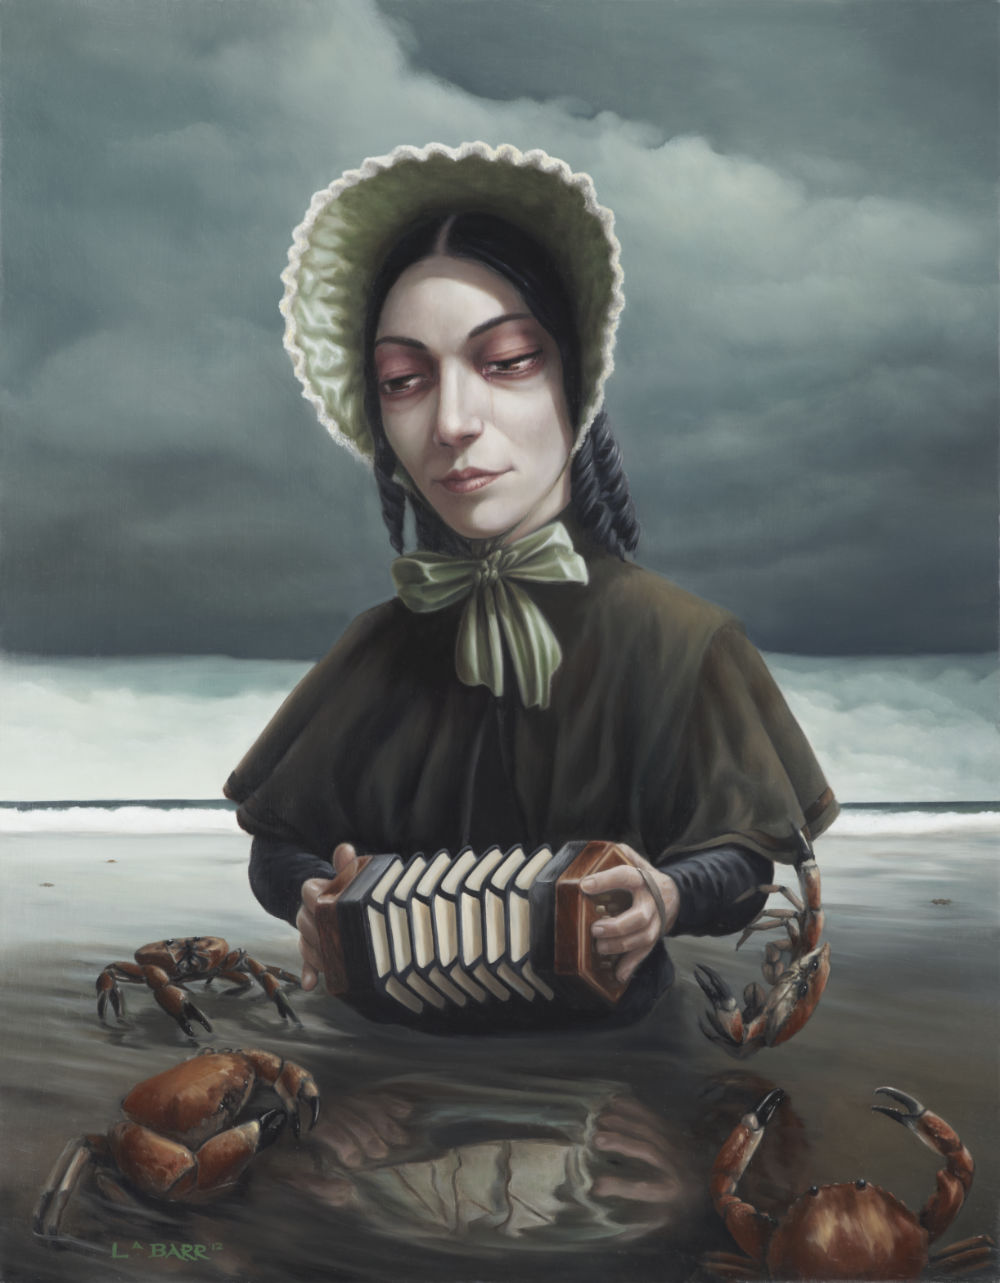 Painting of a woman playing a squeesebox as she sinks into the sand